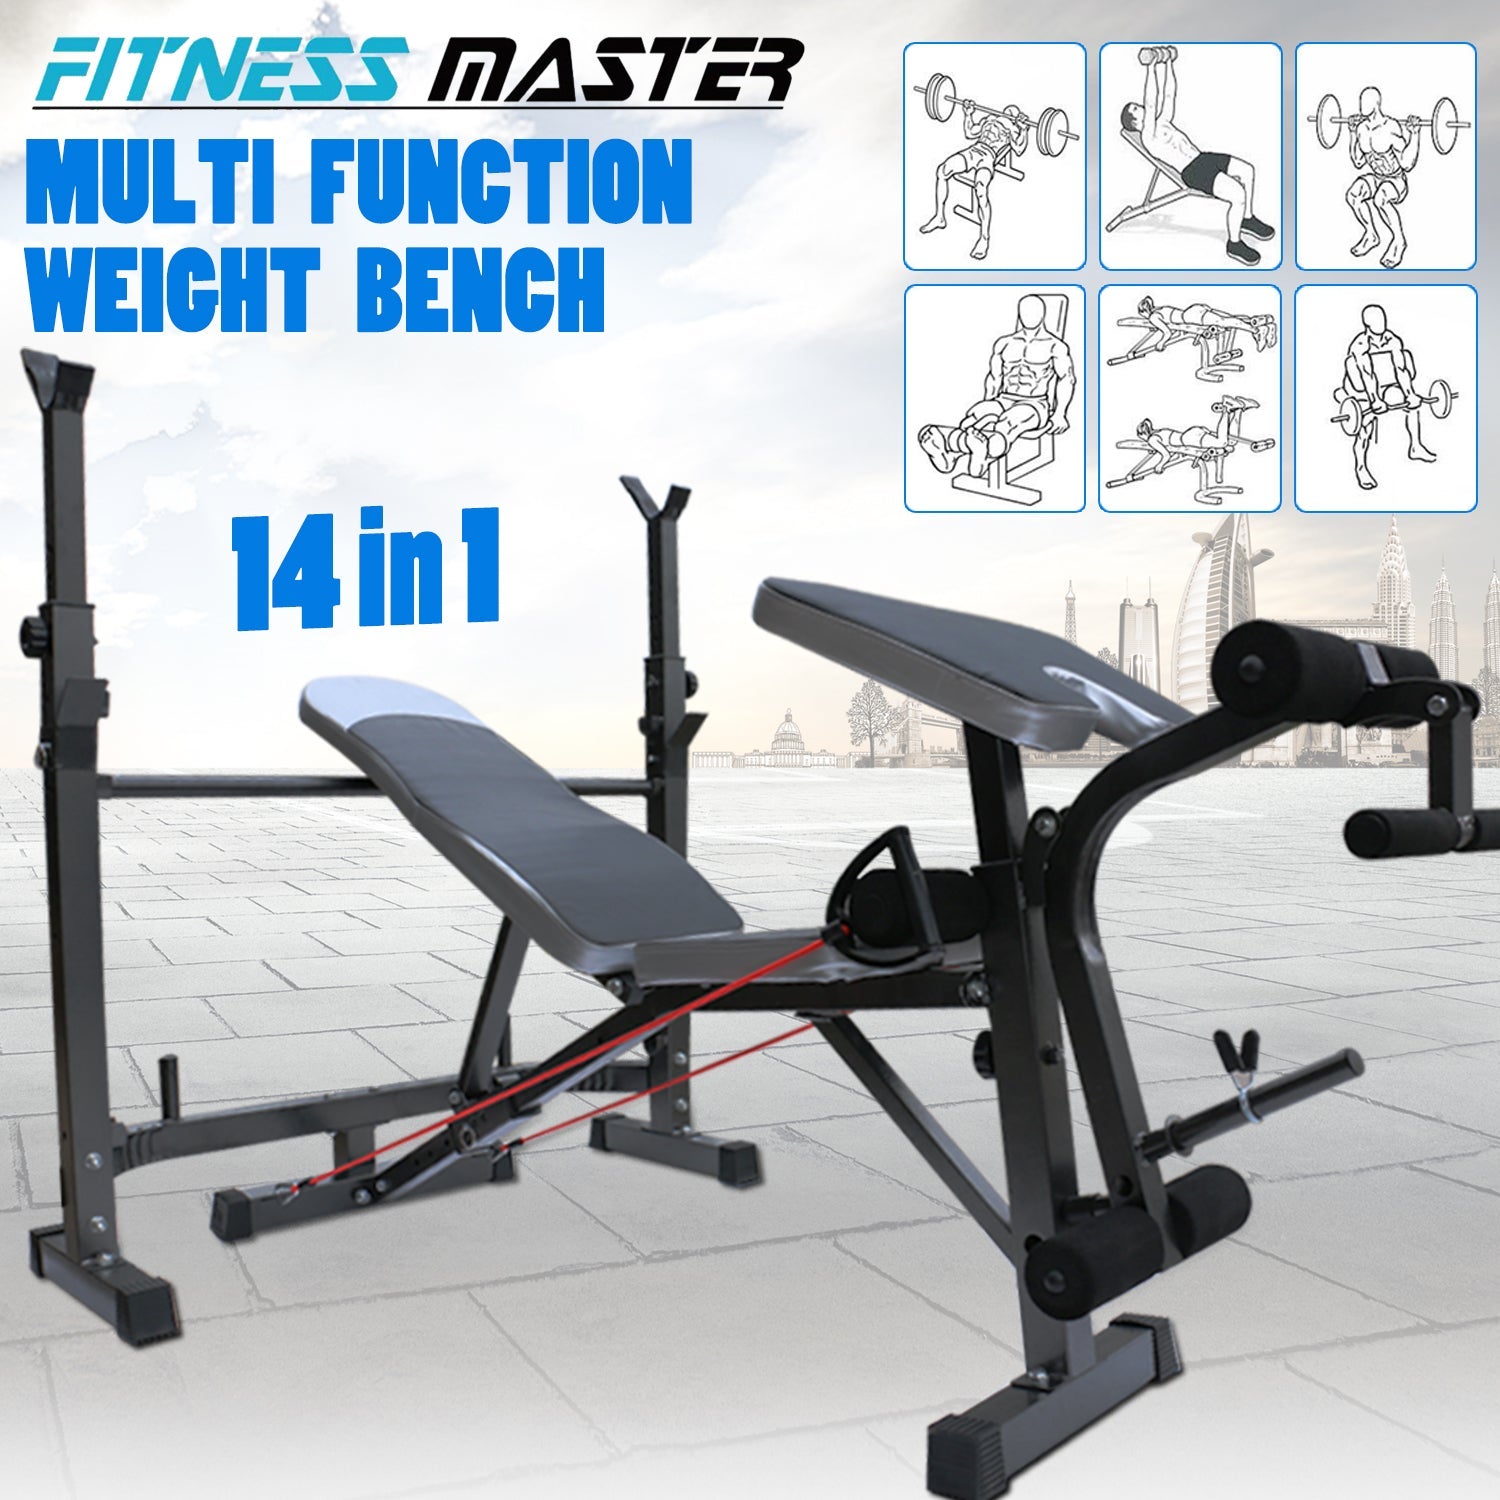 Body Champ Bcb3780 Olympic Weight Bench With Leg Extension Curl Lift Developer Attachment 2 Piece Combo Bench A In 2020 Olympic Weights Weight Benches Weight Bench Set